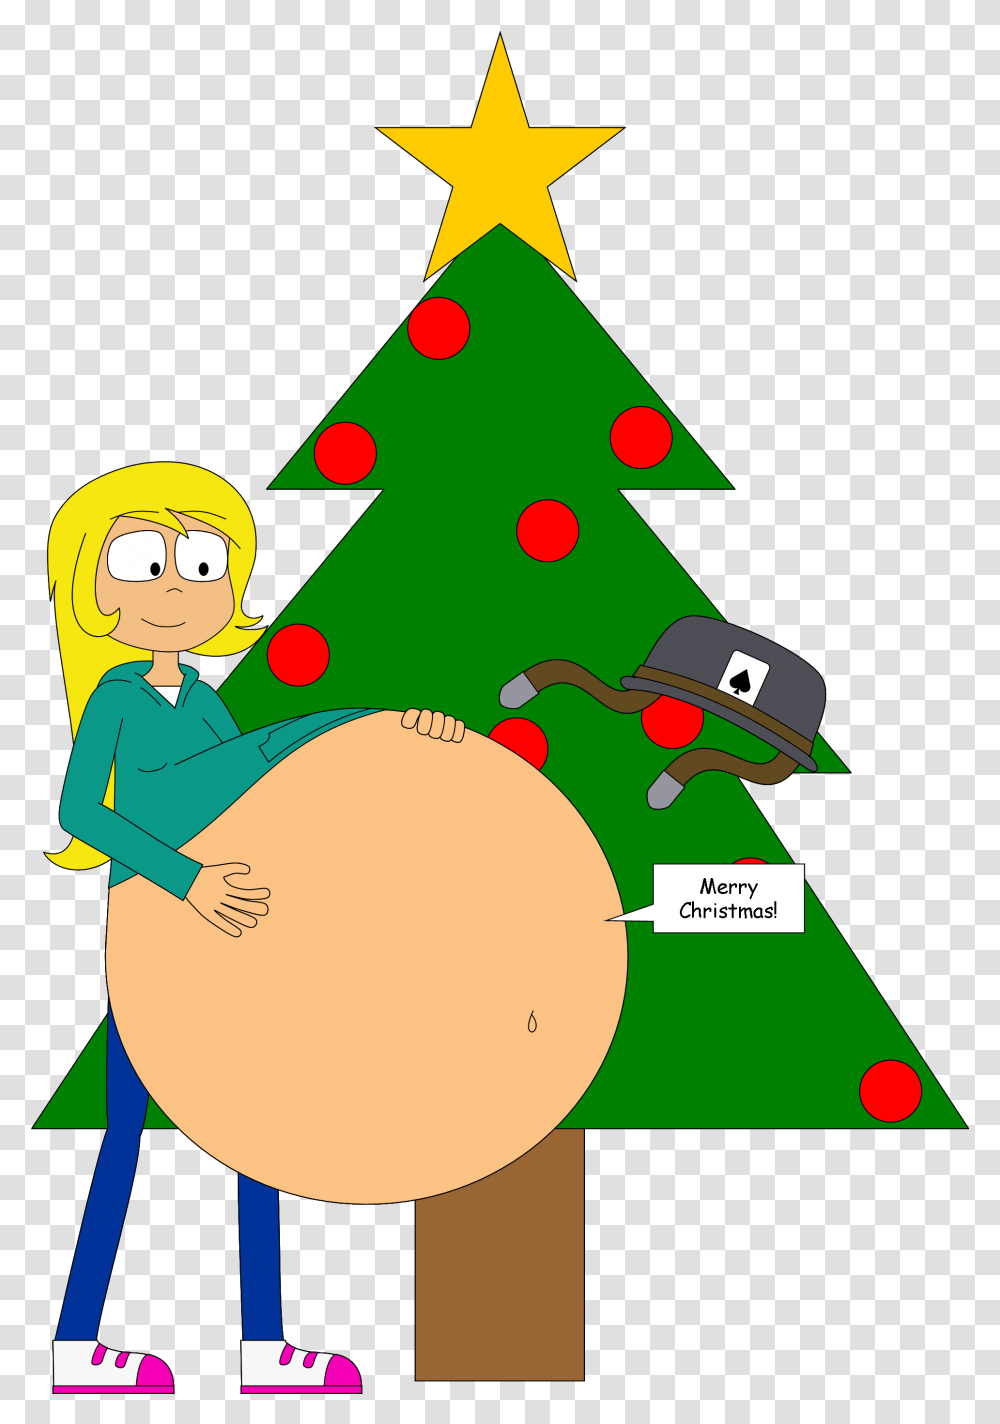 Angry Signs 45 3 A Christmas With Girlsvoreboys By Vore Eve, Tree, Plant, Ornament Transparent Png